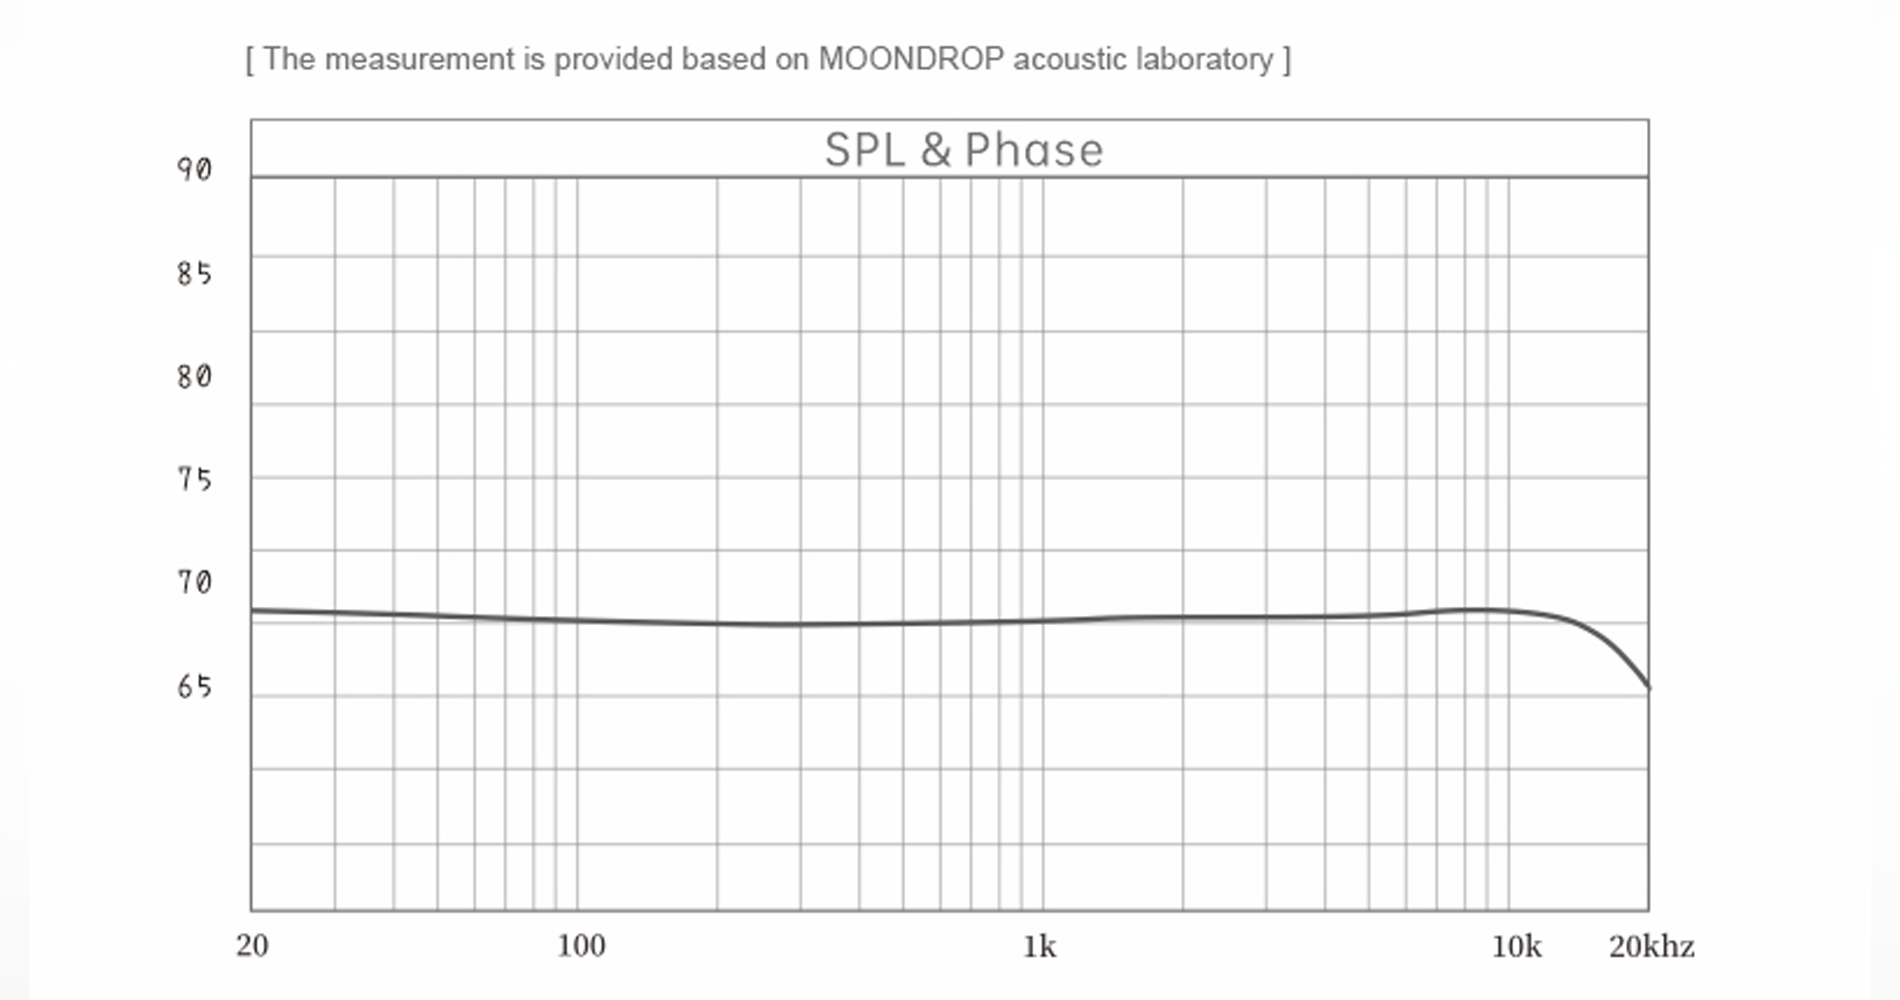 MoonDrop Blessing 3 Frequency Response Graph